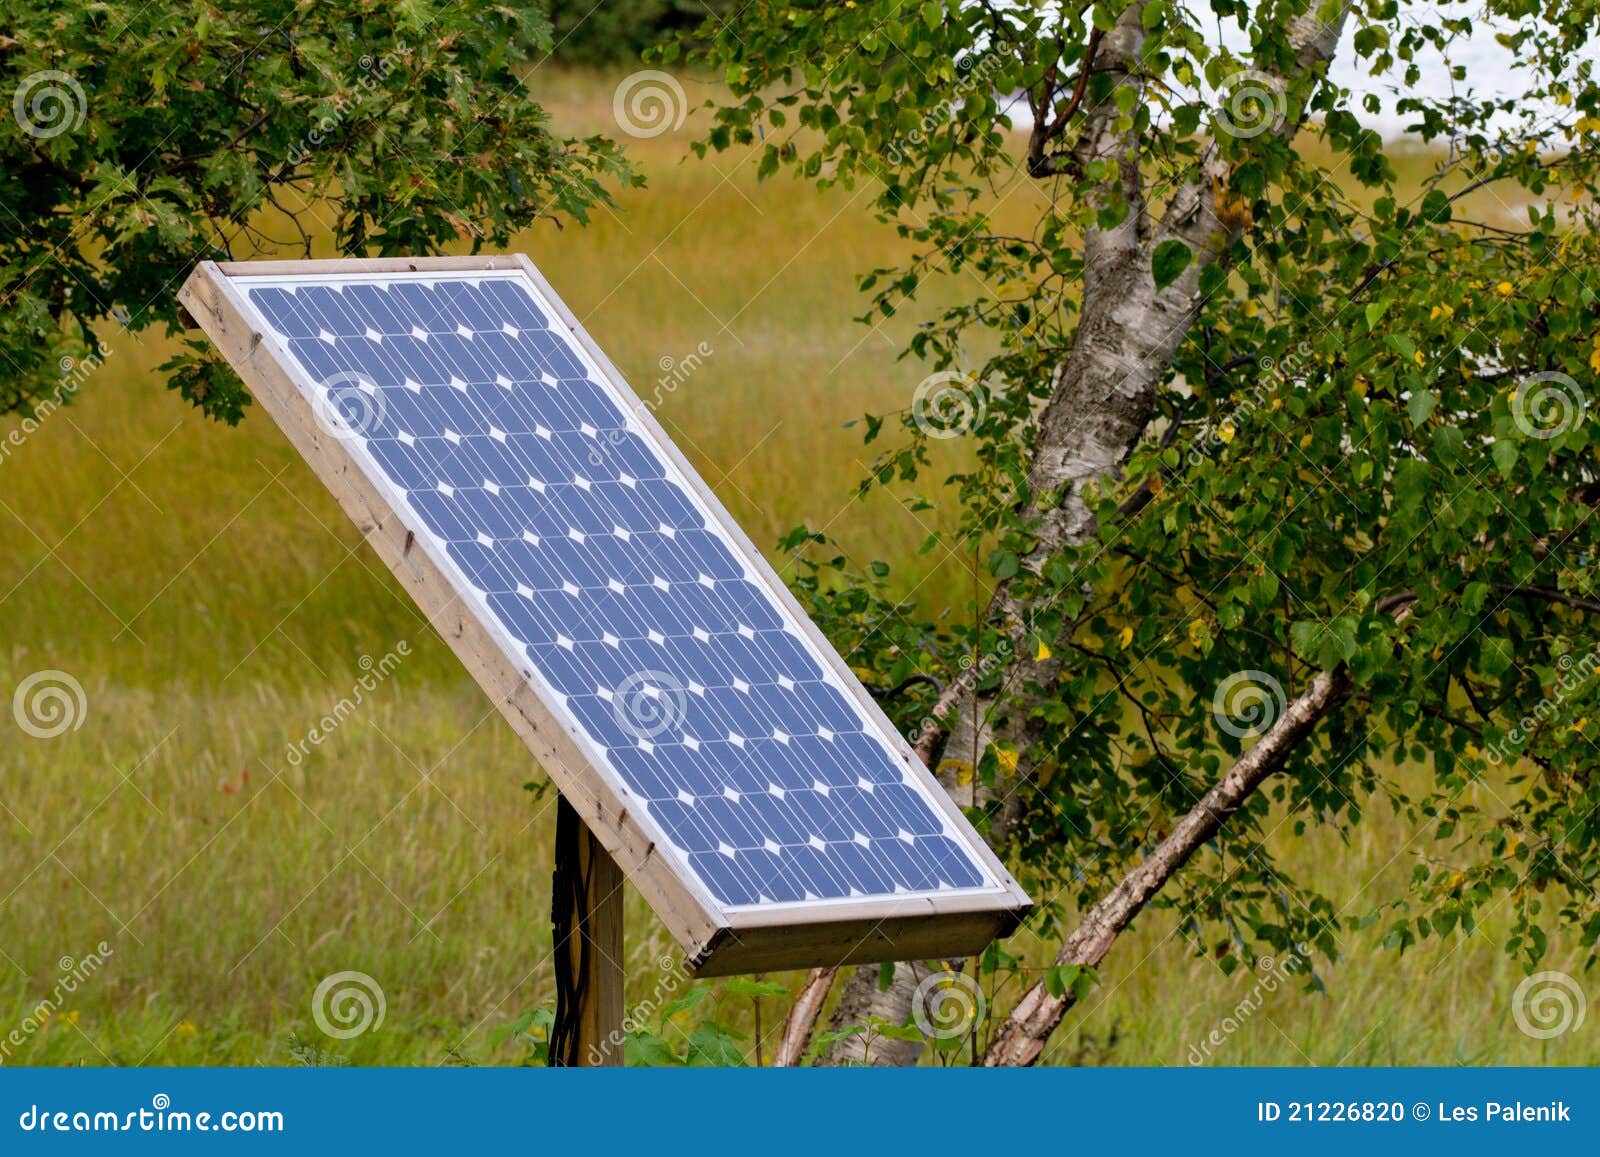 Solar Panel In Natural Setting Stock Photo - Image: 21226820